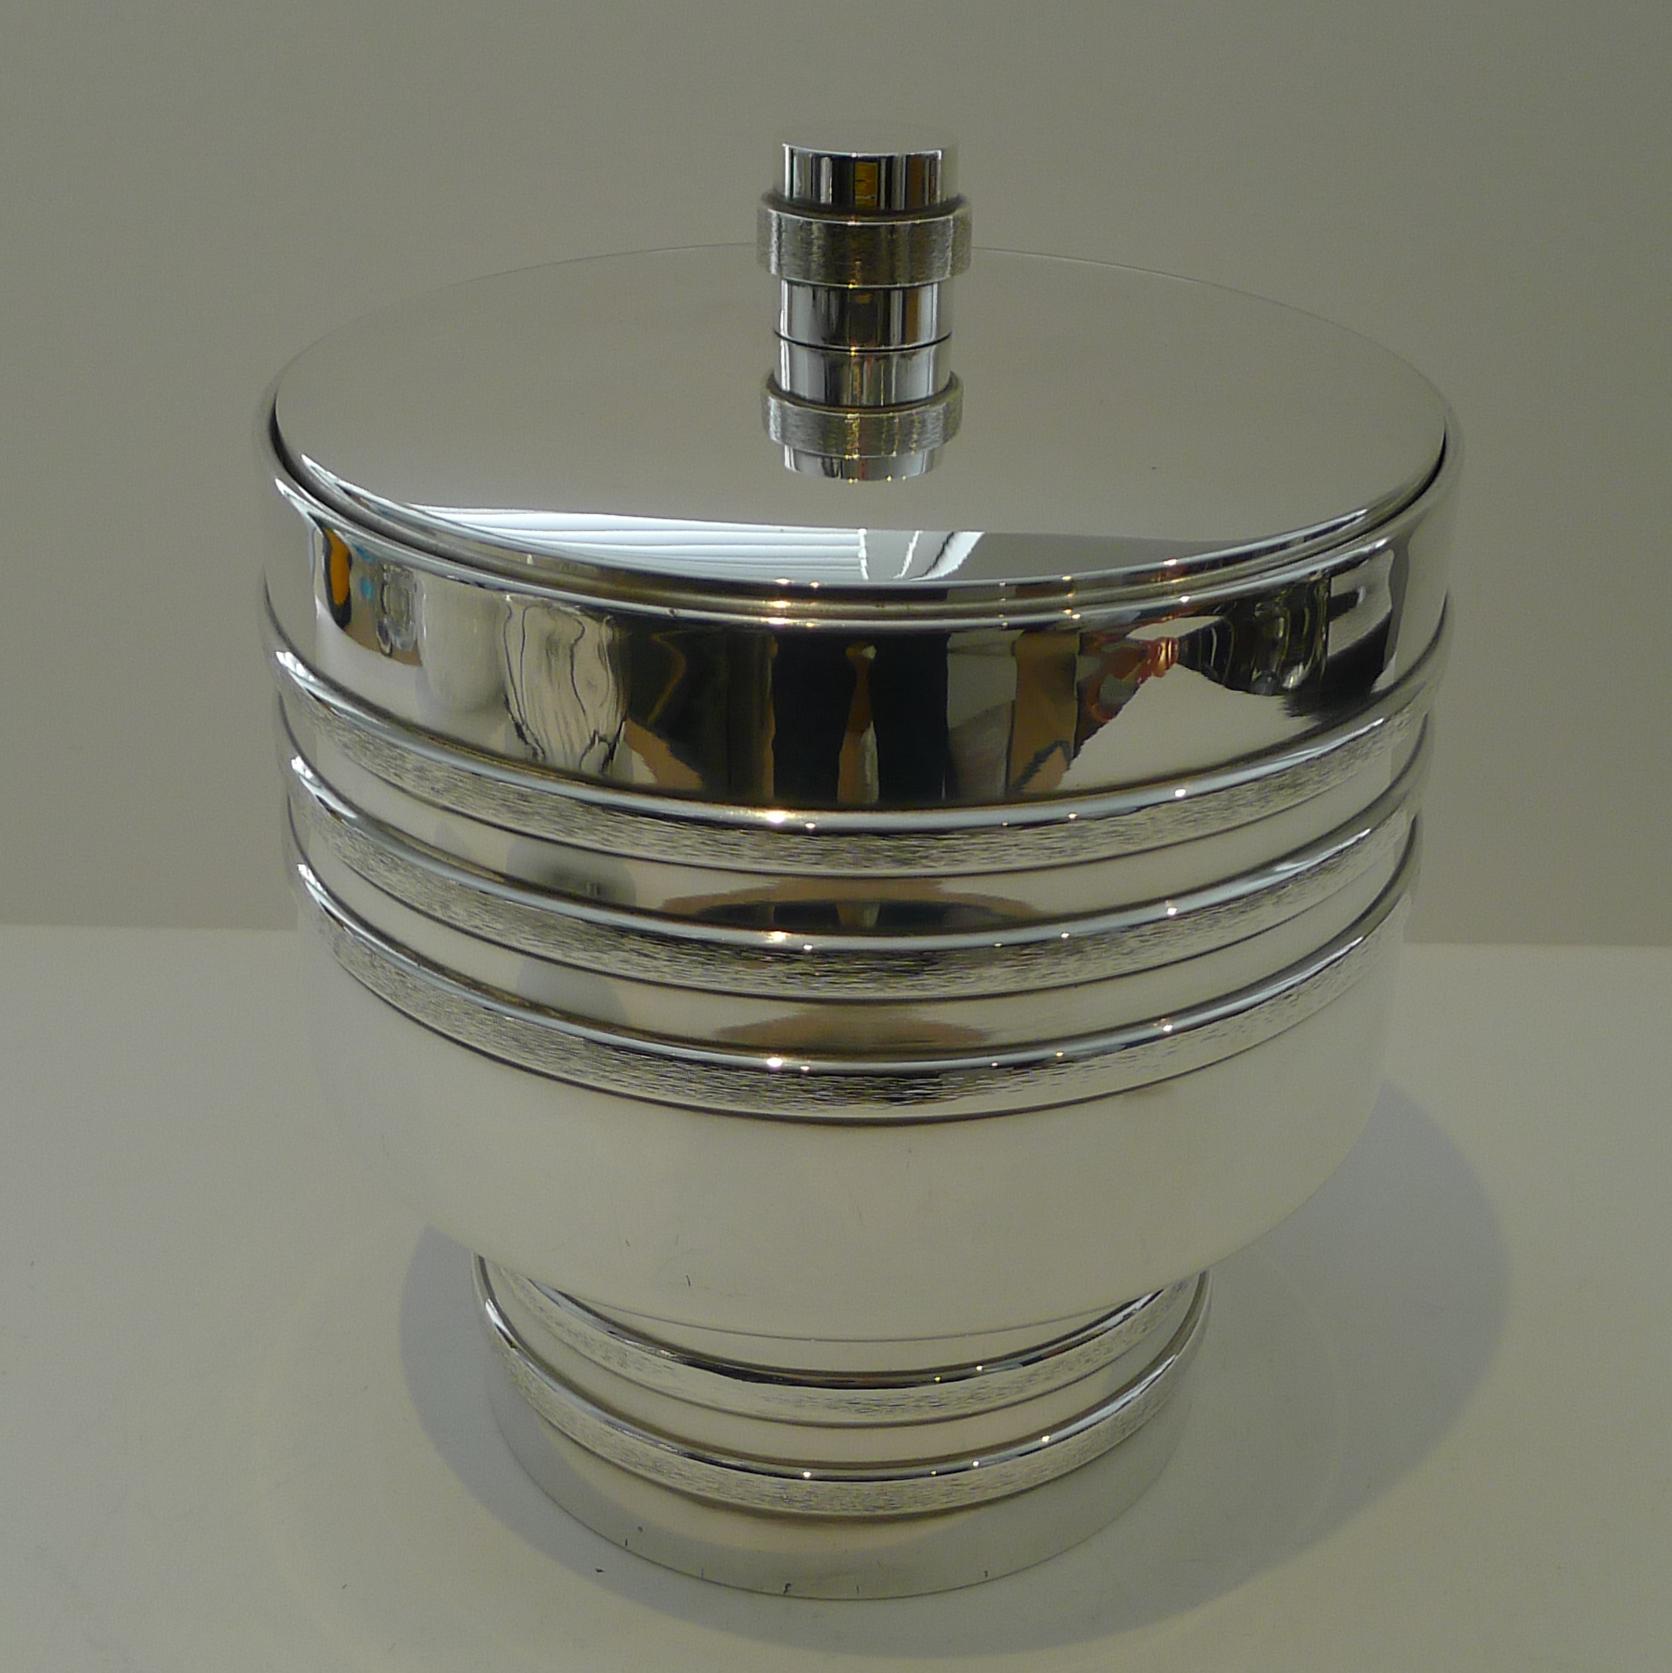 A truly stylish vintage Mid-Century Modern ice bucket, sourced in Italy and just back from my silversmith's workshop where it has been overhauled and re-silvered, restoring it to it's former glory.

About as stylish and fashionable as they, get